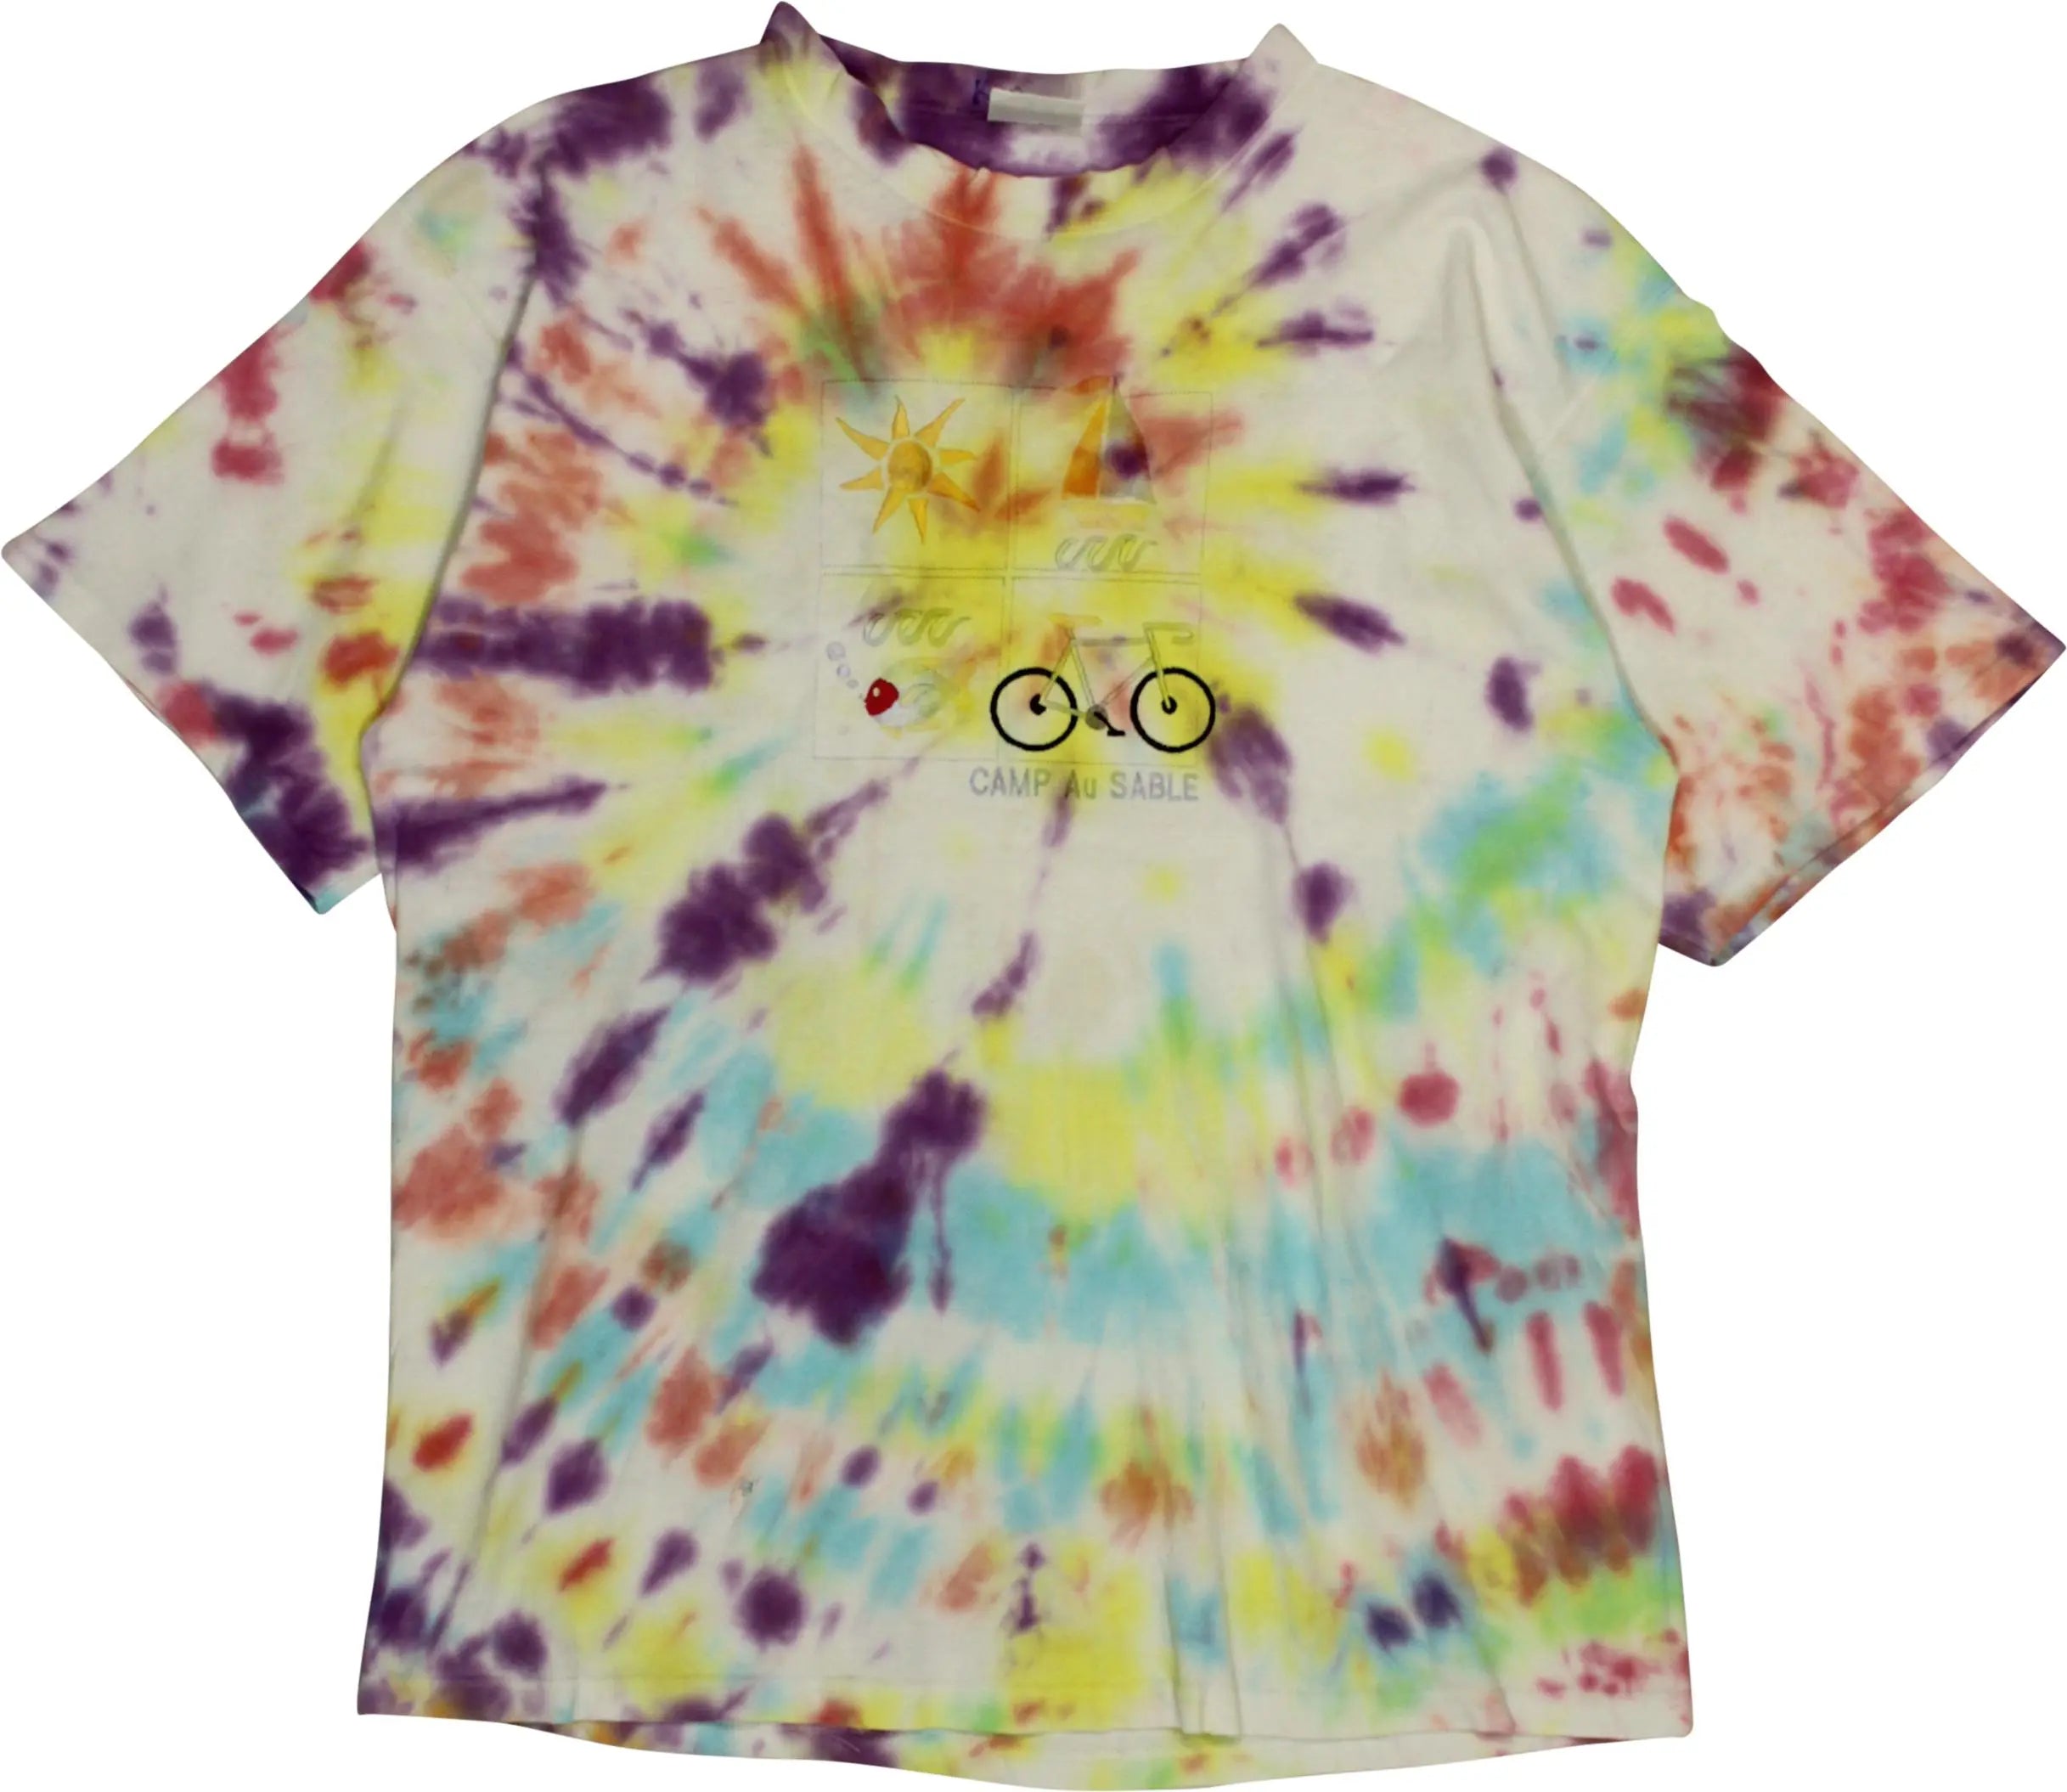 Santee Hvywt - 90s Tie Dye T-Shirt- ThriftTale.com - Vintage and second handclothing